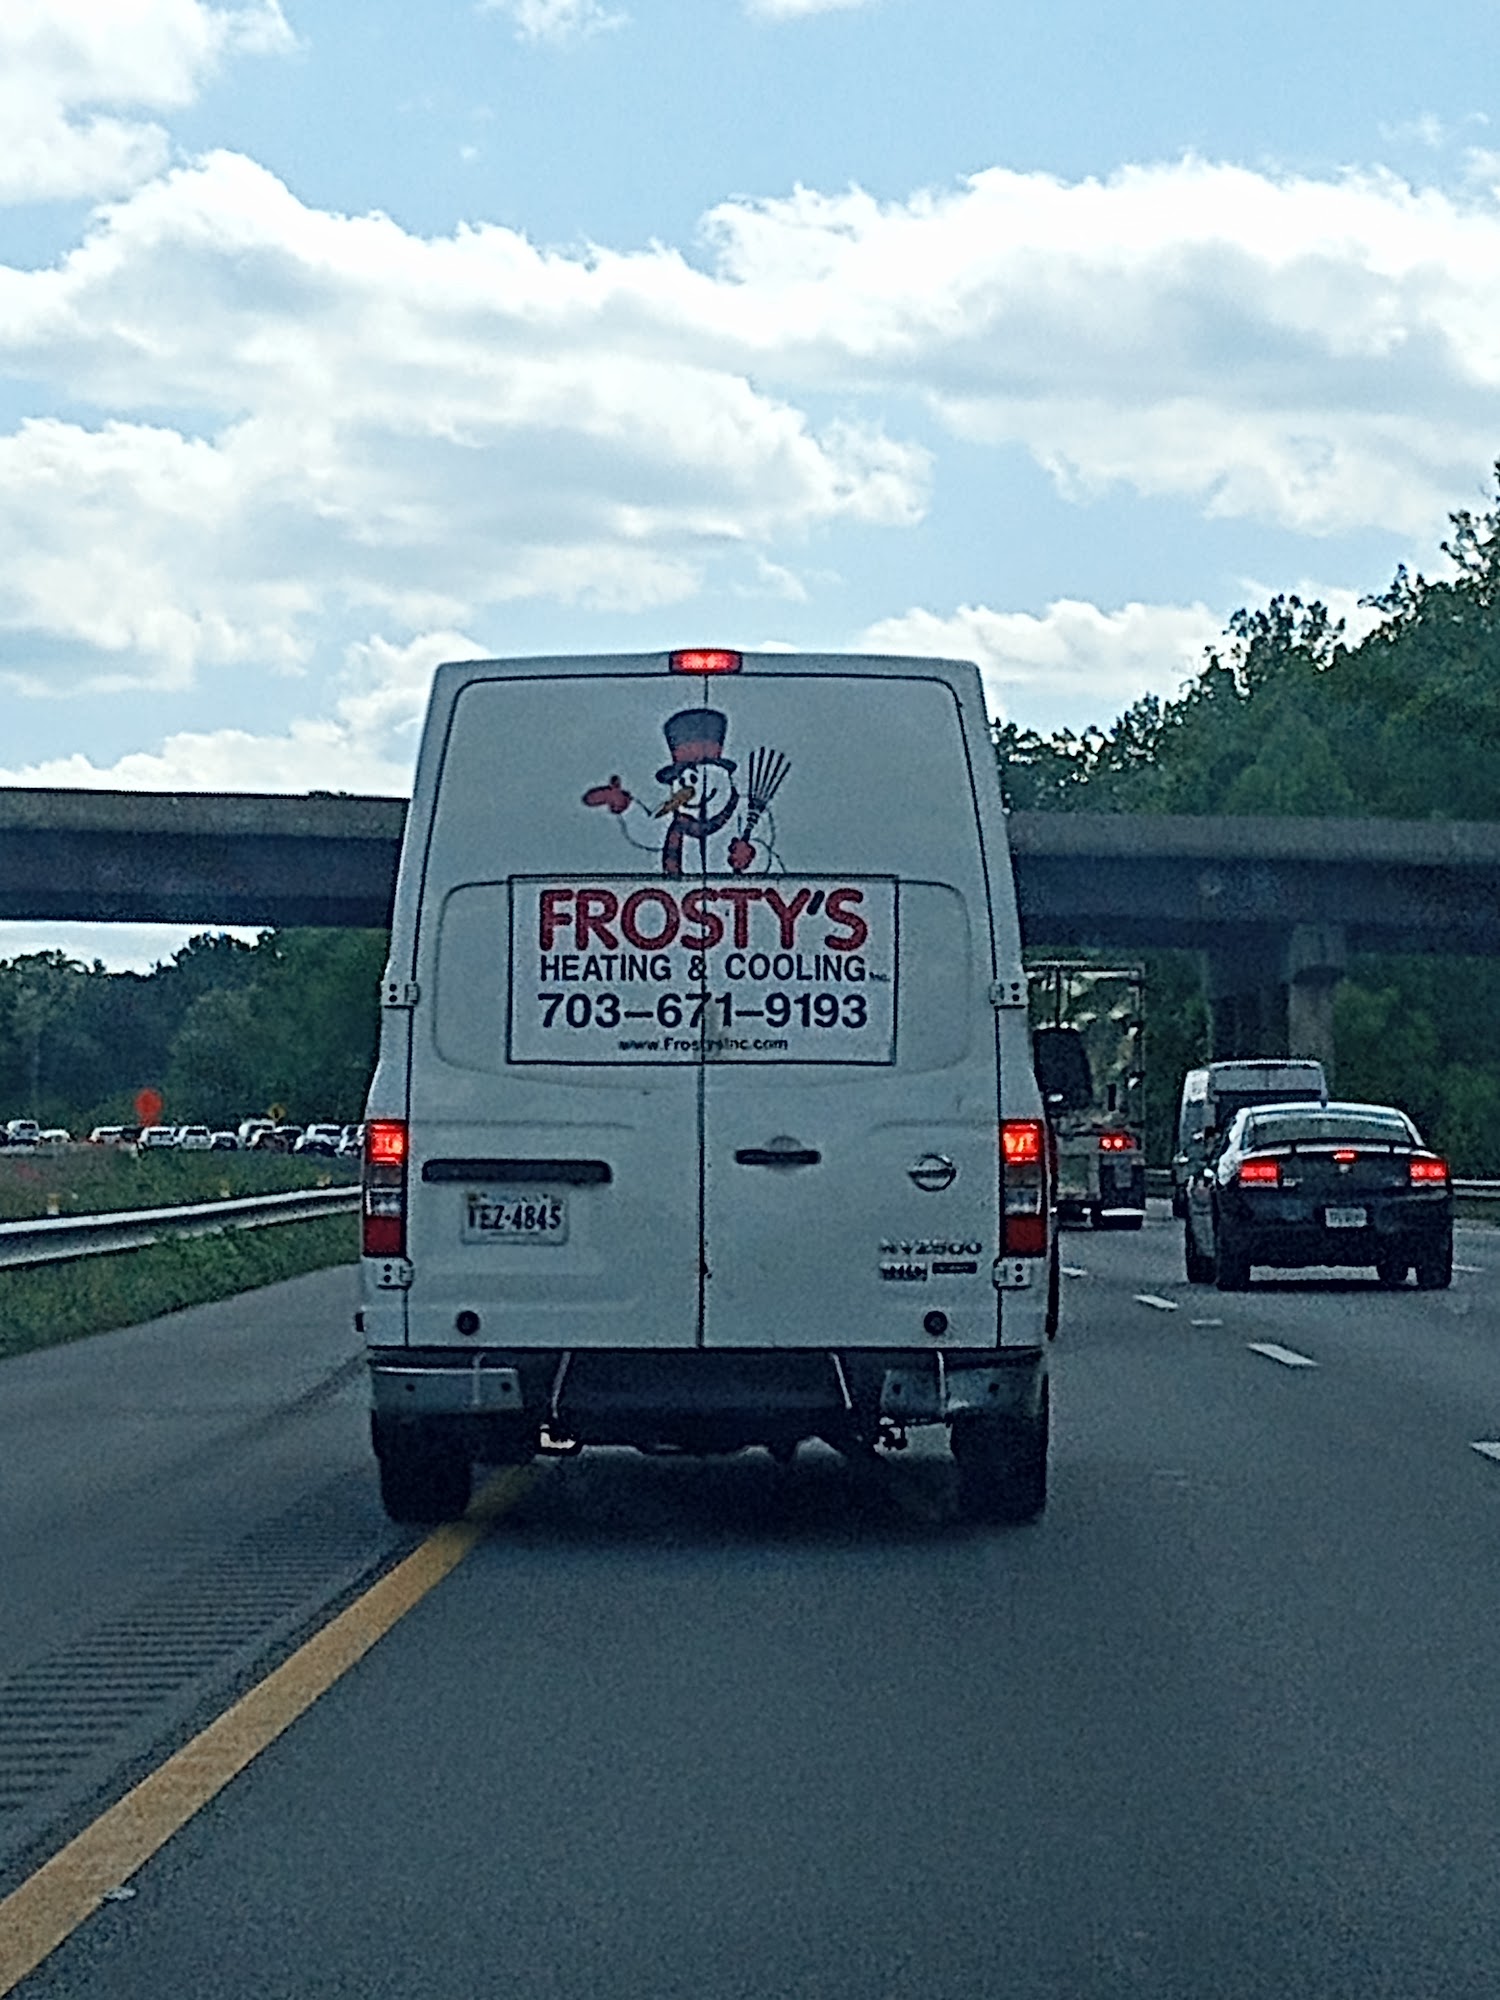 Frosty's Heating & Cooling, Inc.